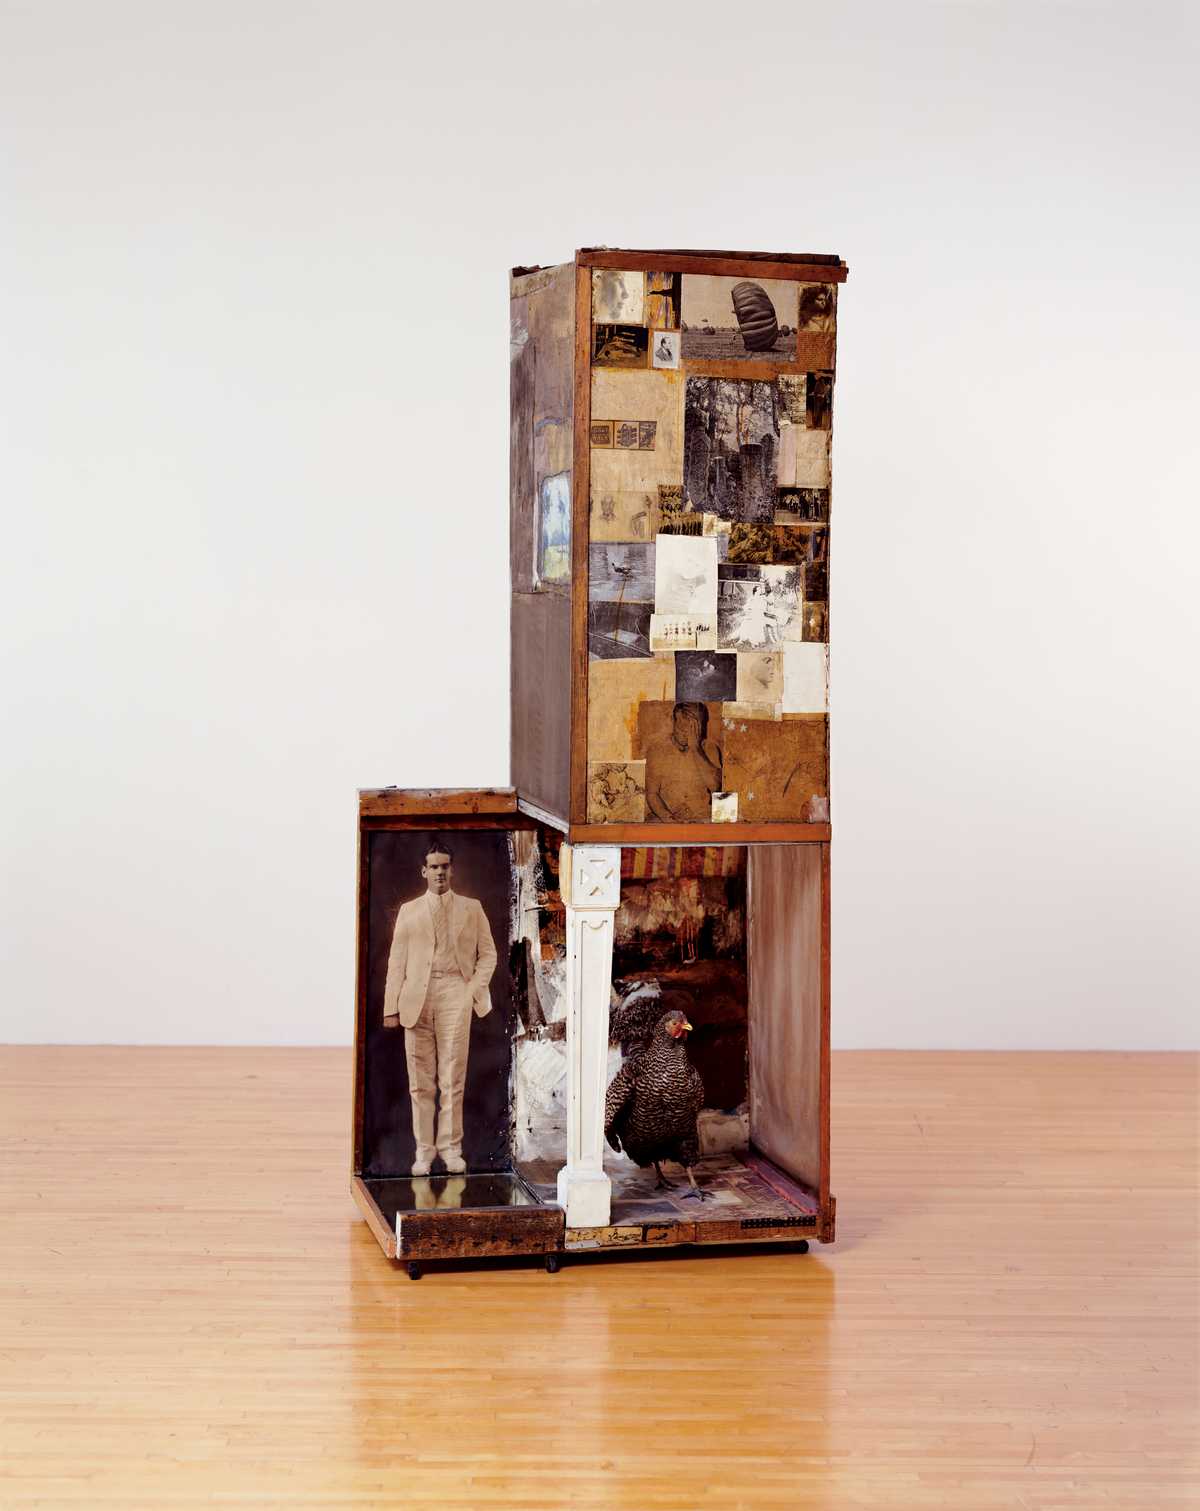 A tall slender wooden box plastered in postcards and new paper clippings, one corner of the box opens and is supported by a white wooden table leg